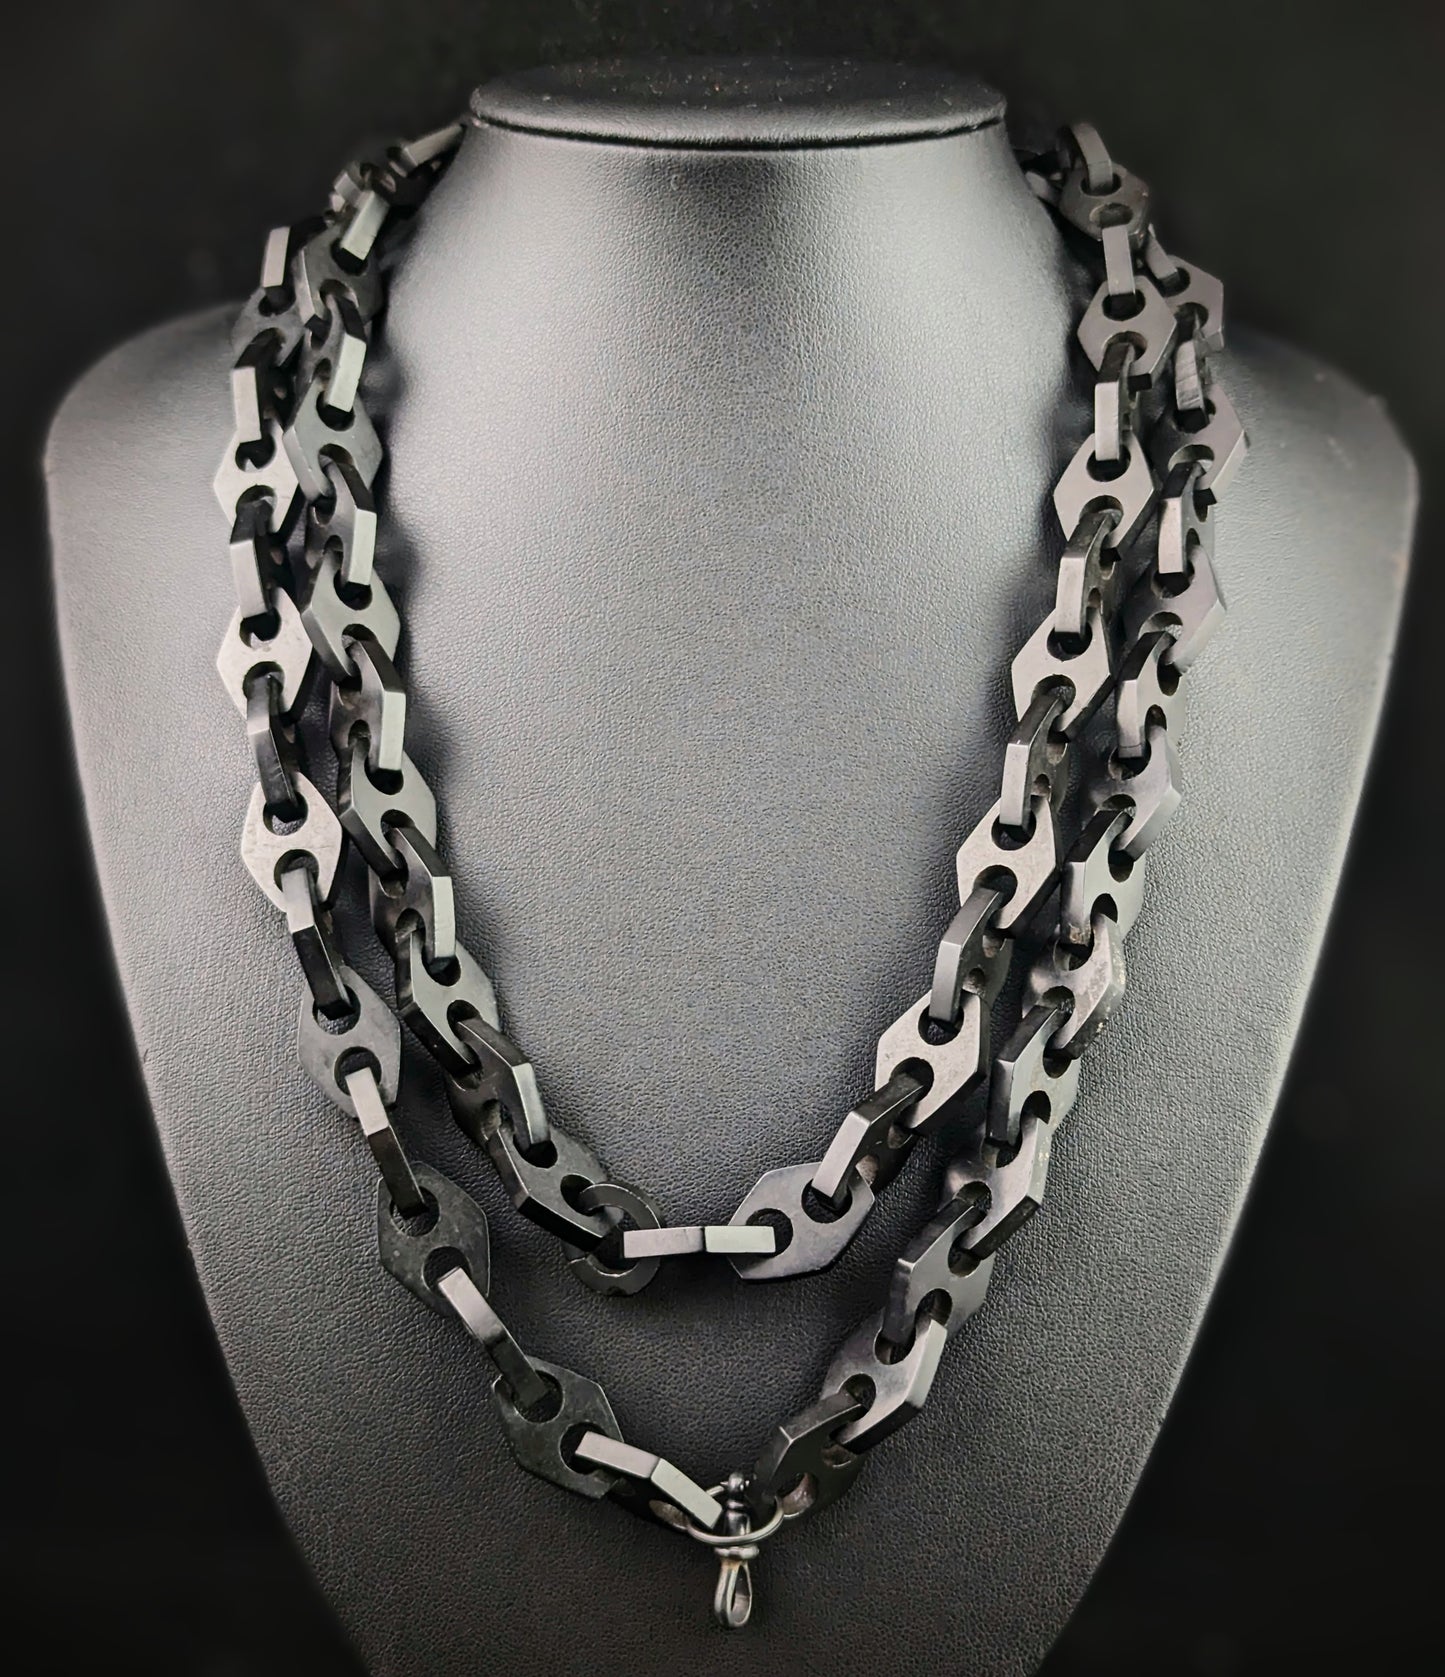 Antique Vulcanite longuard chain necklace, mourning